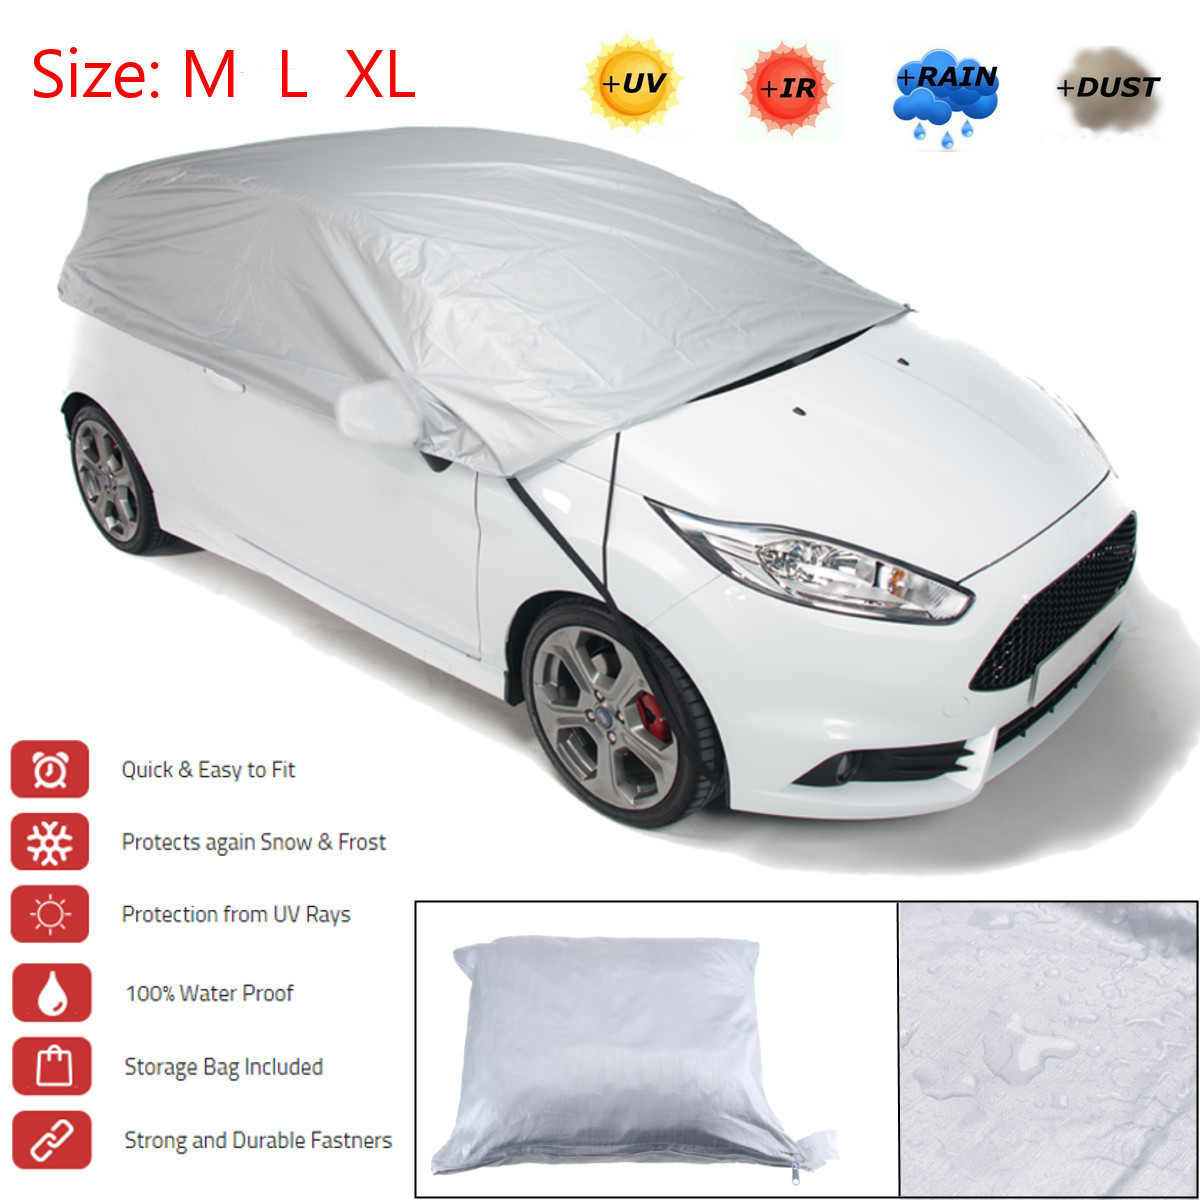 Waterproof-Outdoor-Car-Top-Cover-Sun-Rain-Dust-Snow-Leaf-Protection-79950